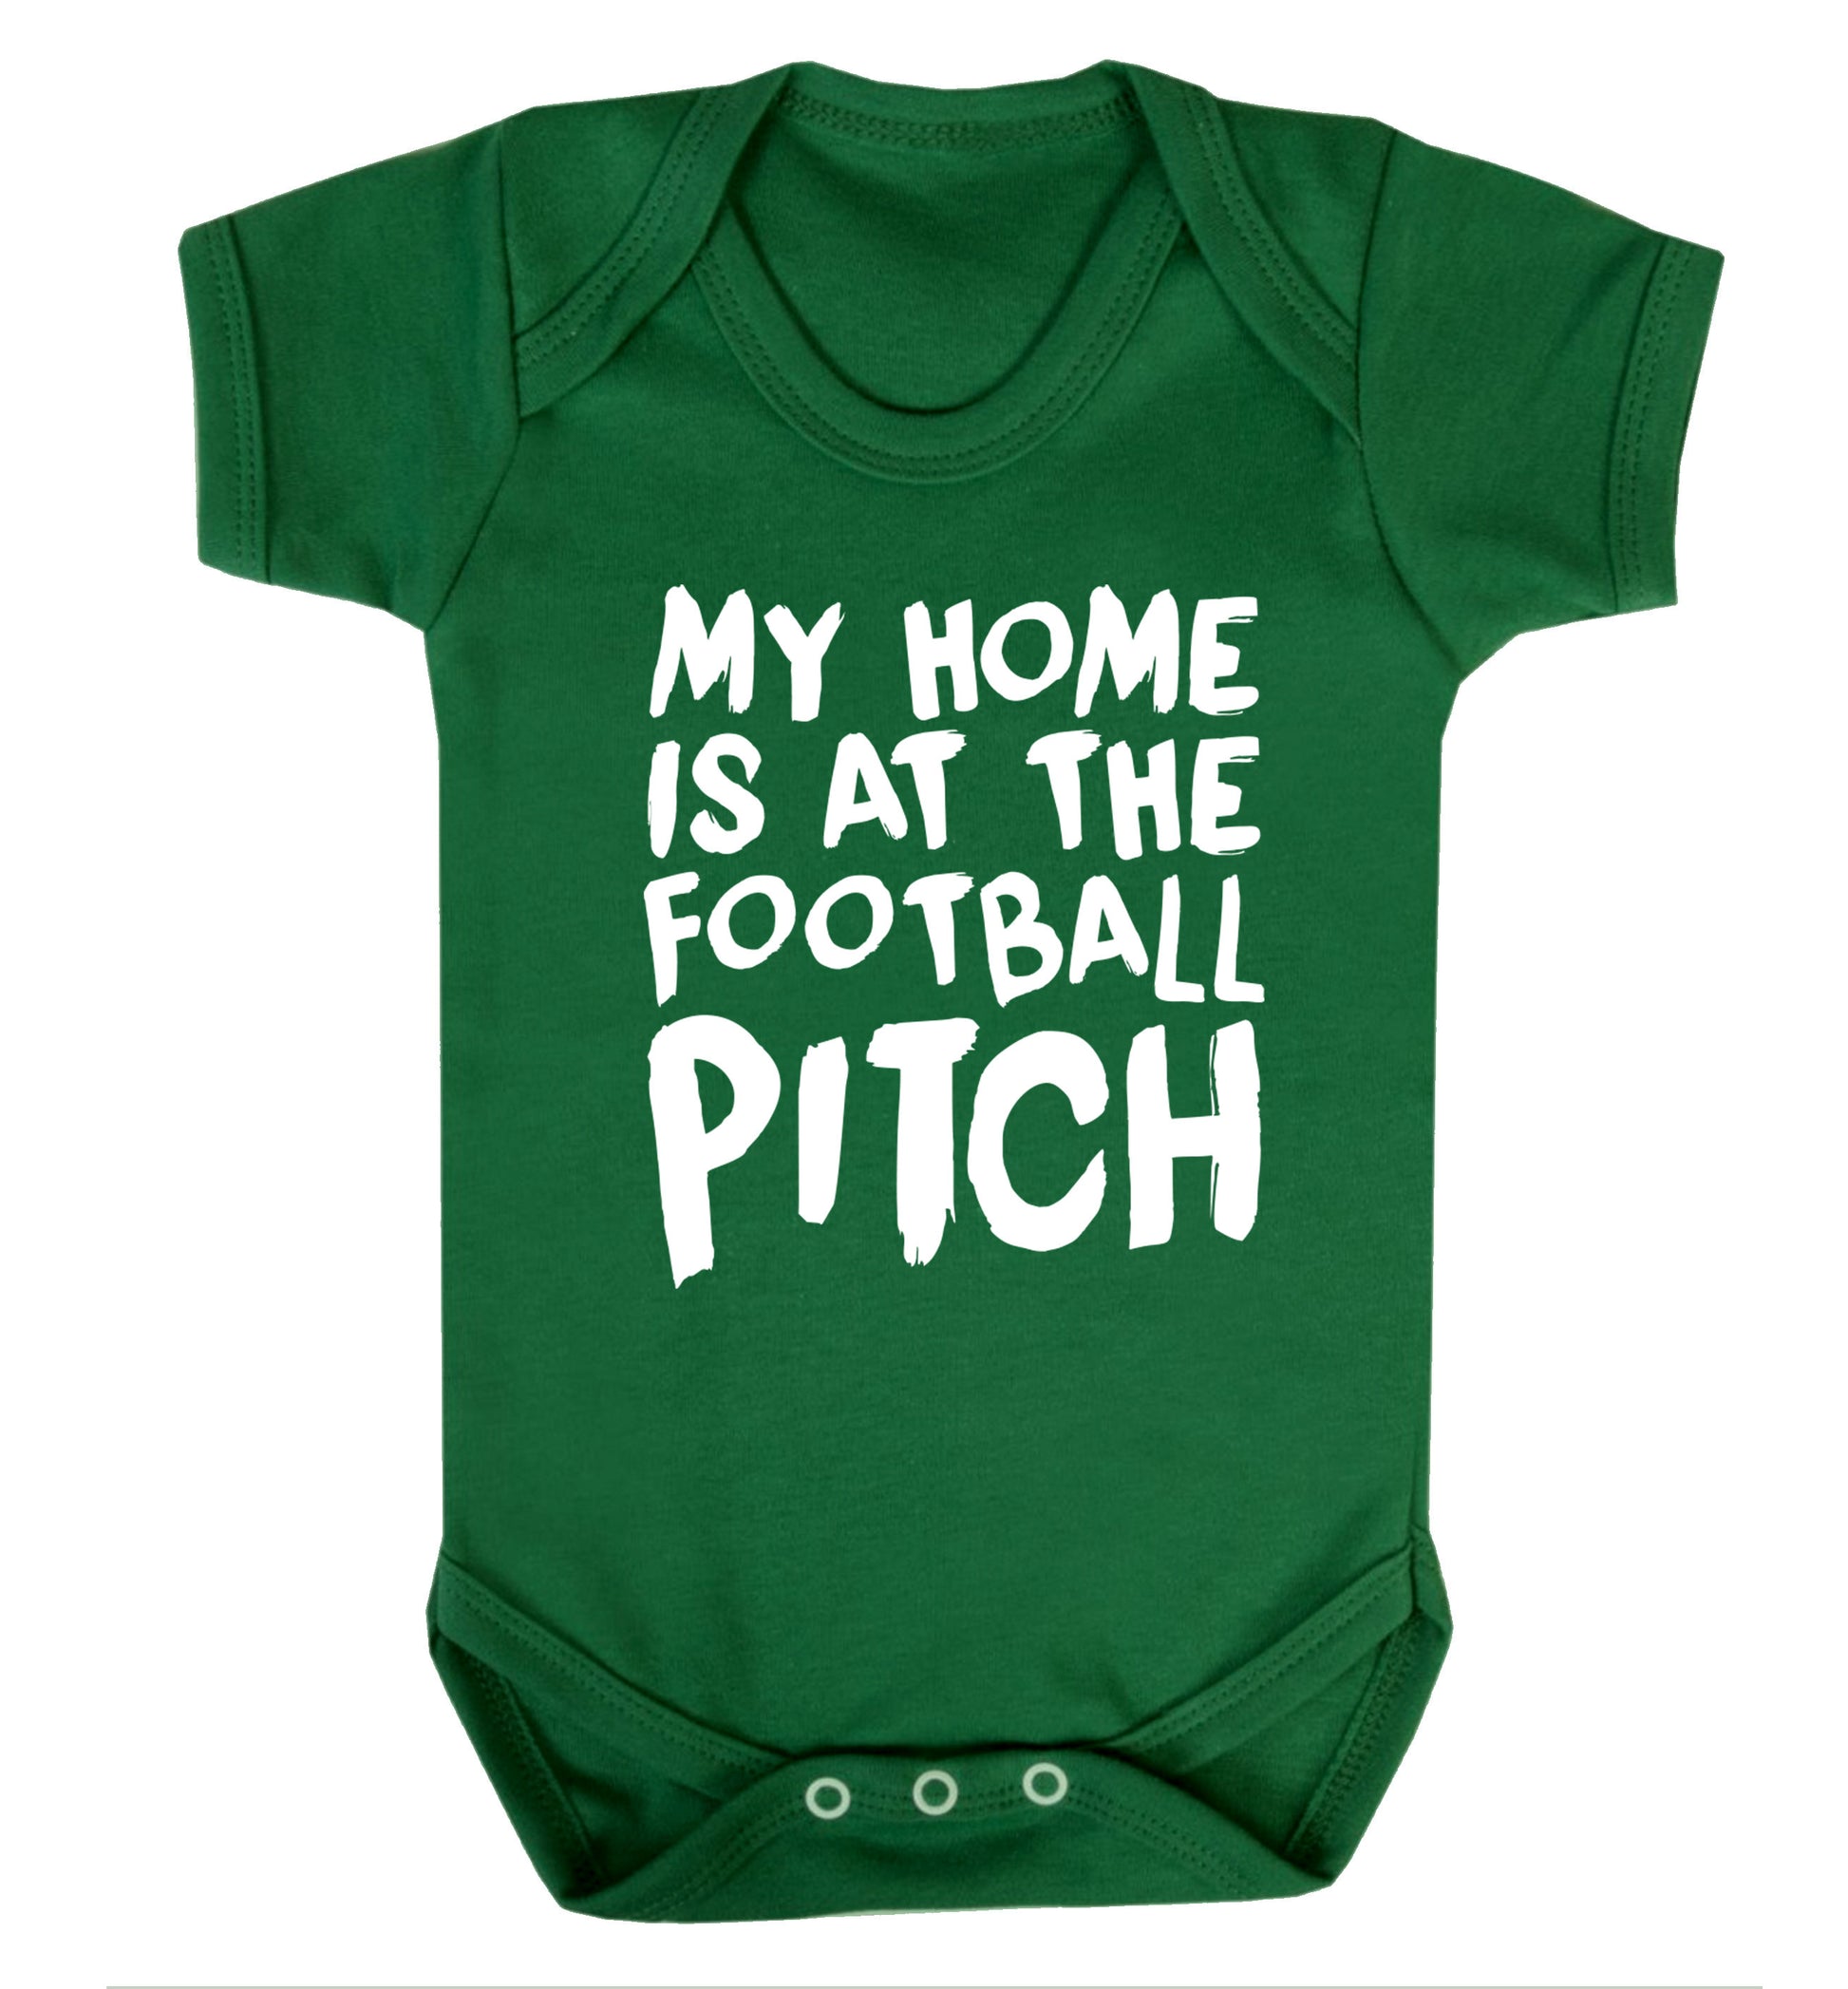 My home is at the football pitch Baby Vest green 18-24 months